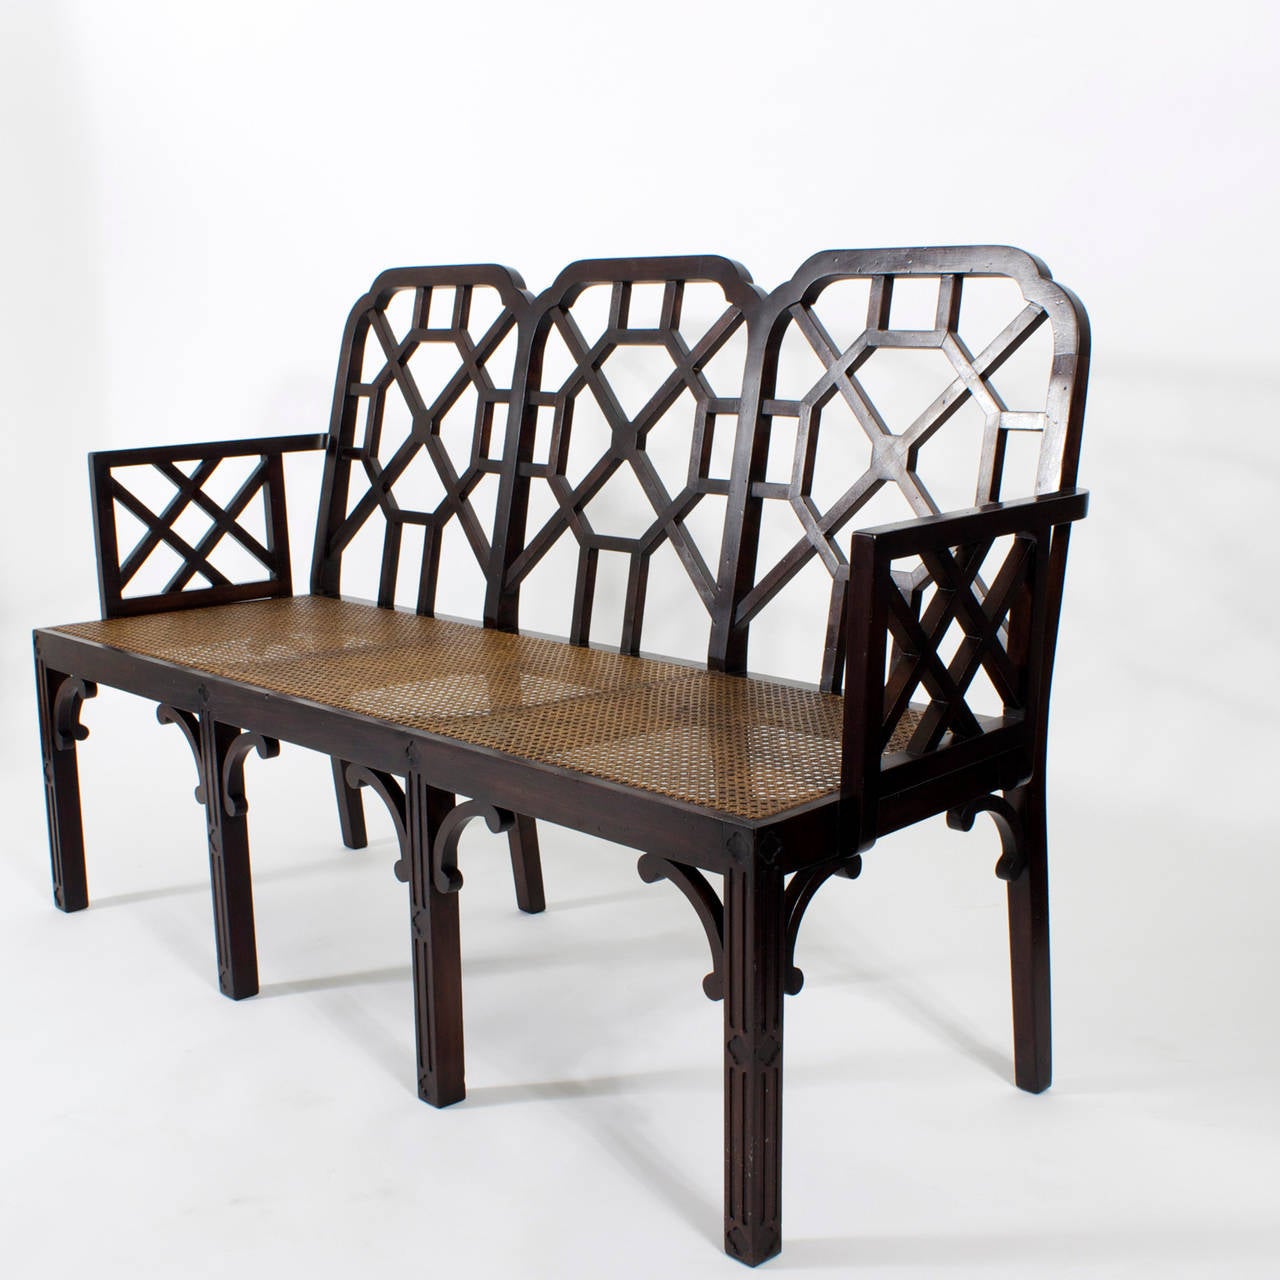 A mid century Chinese Chippendale settee with a polished ebonized finish, caned seat, open fret work lattice or trellis back and arms, with straight paneled  legs and stylized bracket supports. An over all modern take on a timeless form. Newly